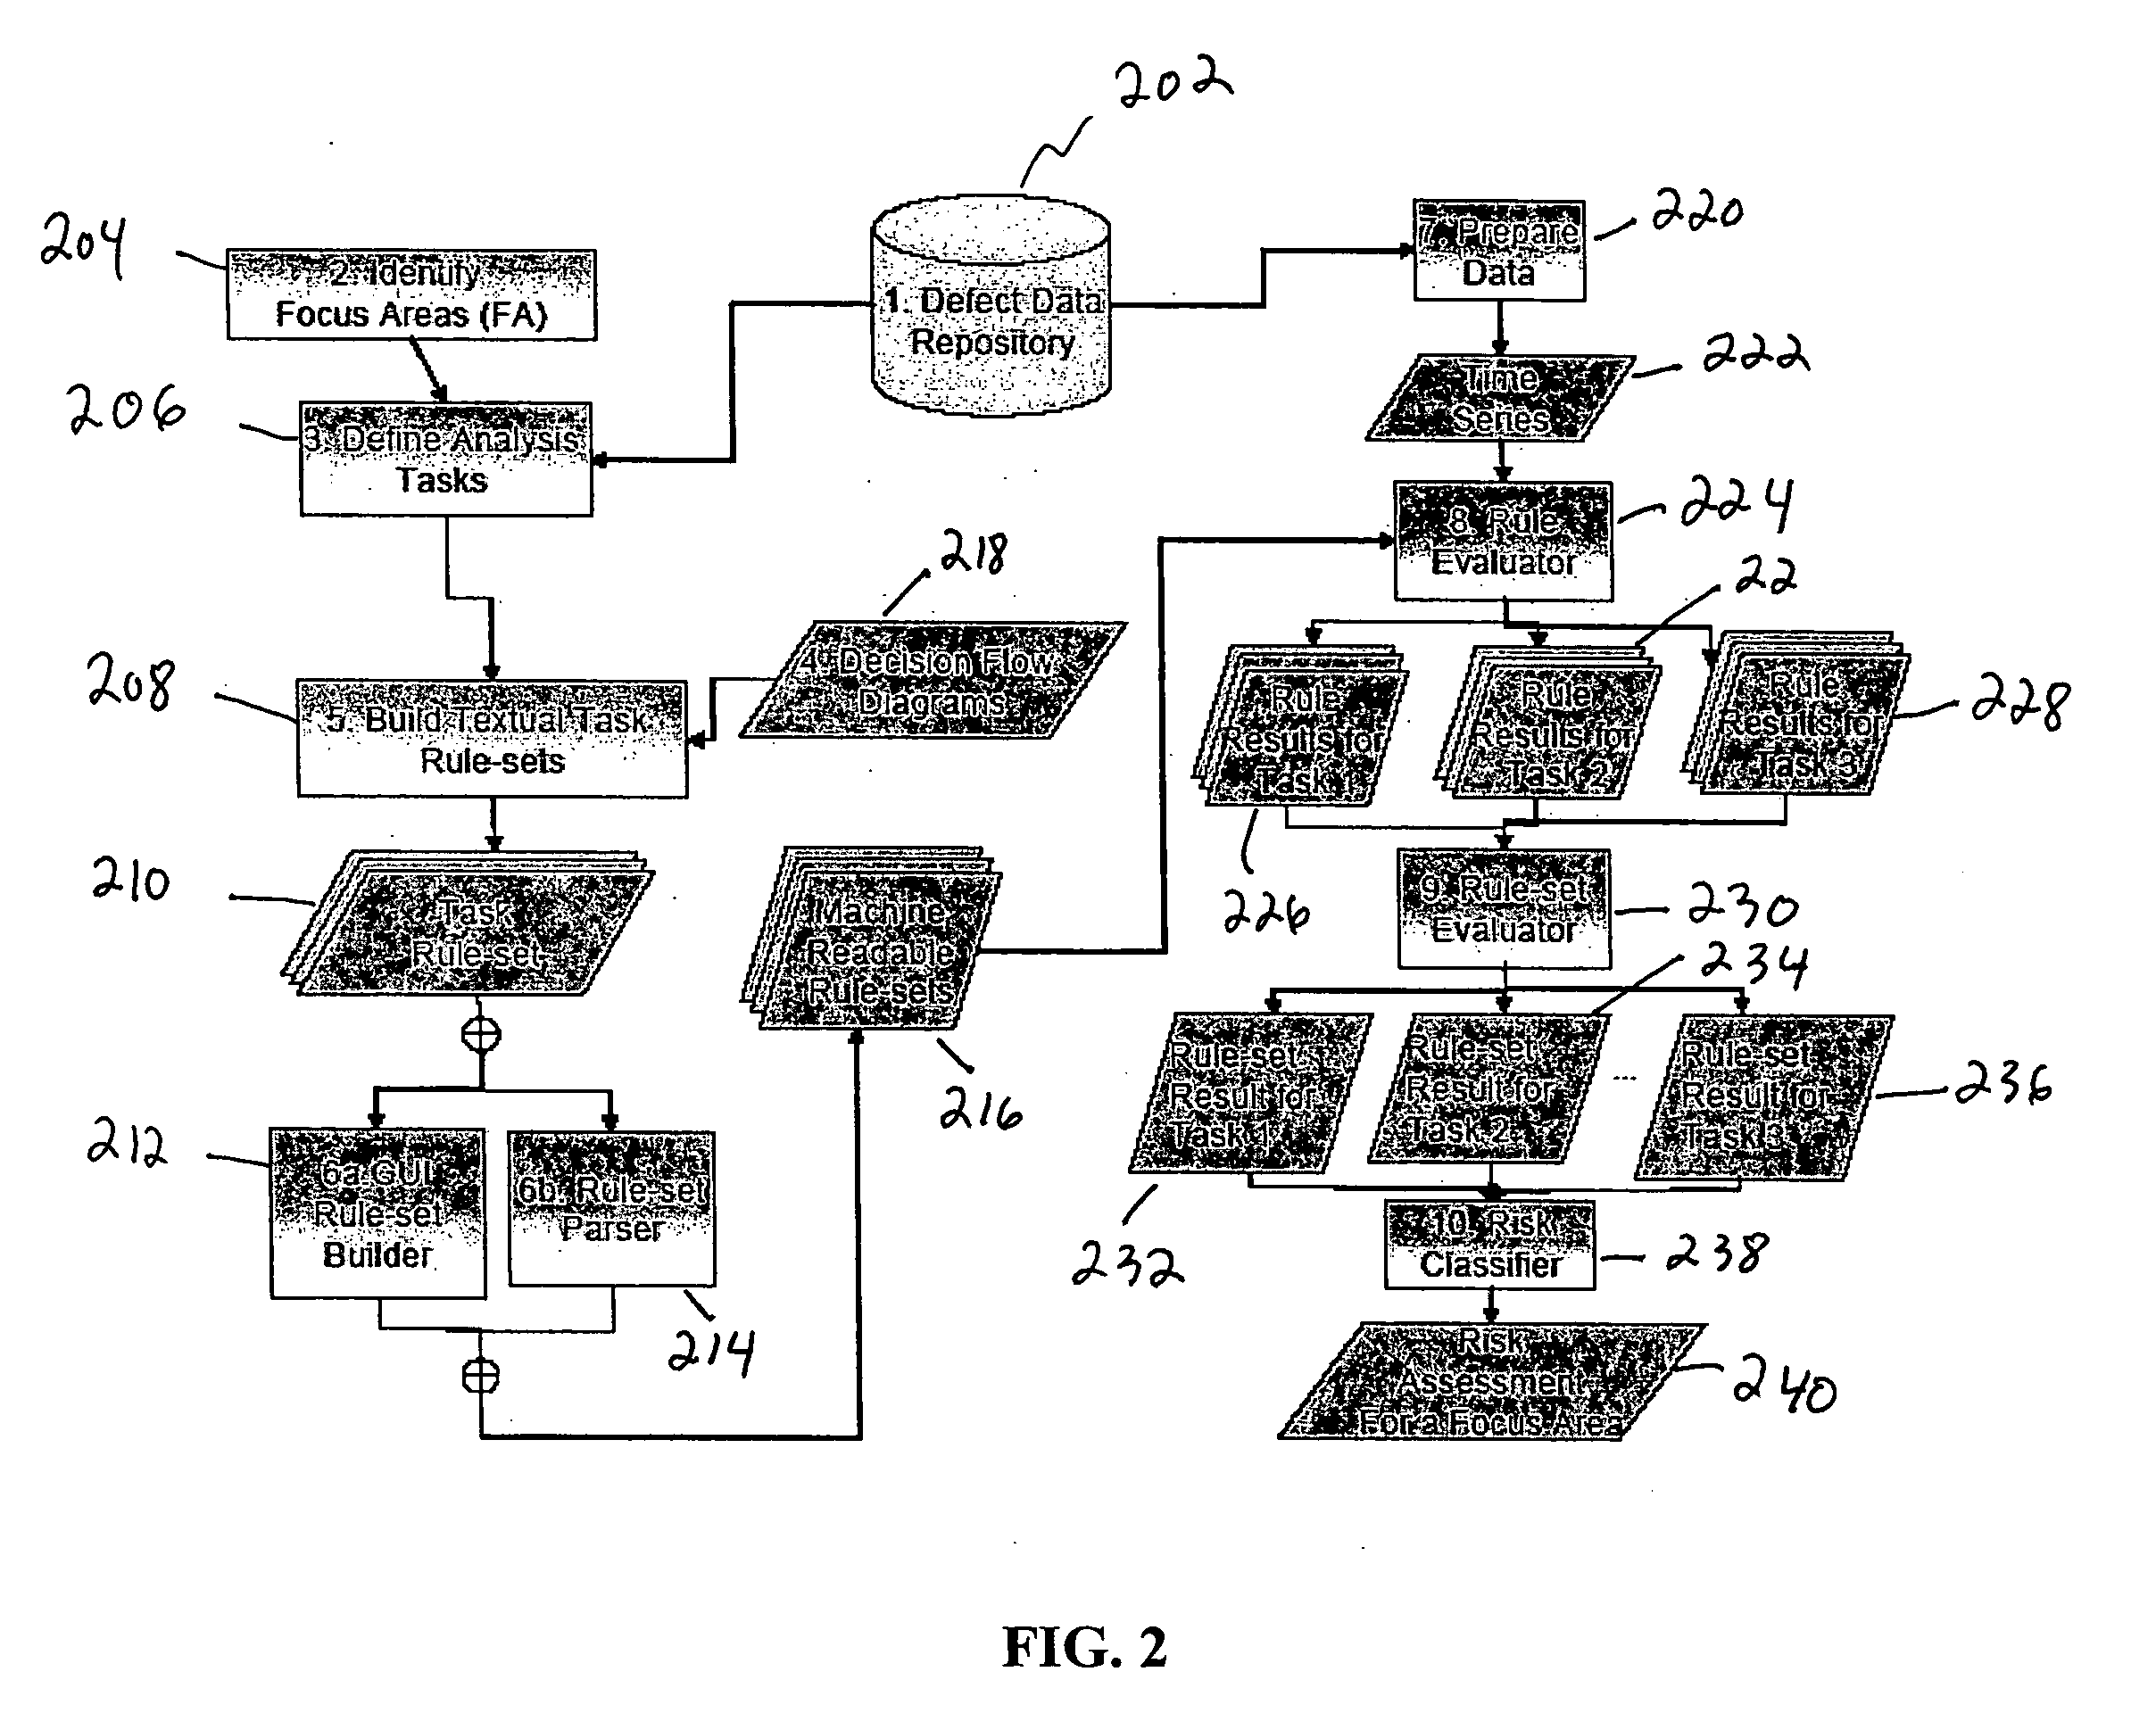 Method and apparatus for automated risk assessment in software projects